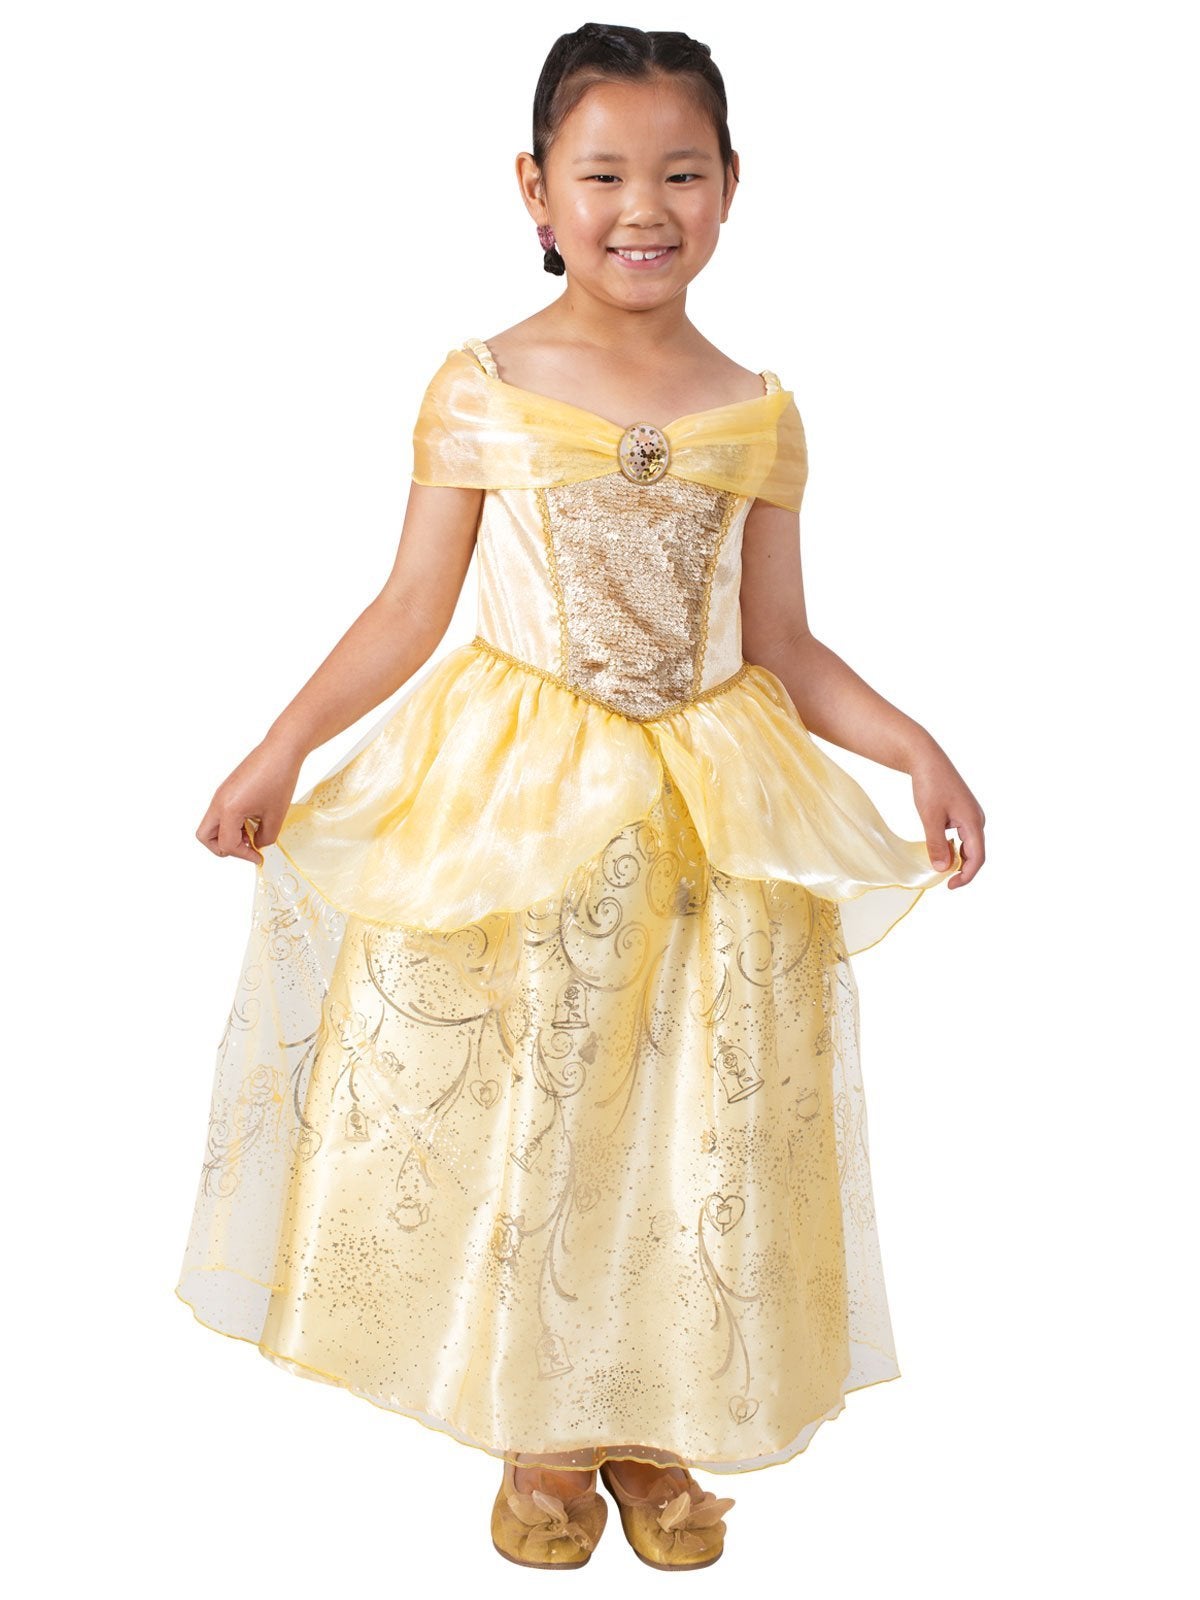 Belle Ultimate Princess Costume for Kids - Disney Beauty & the Beast